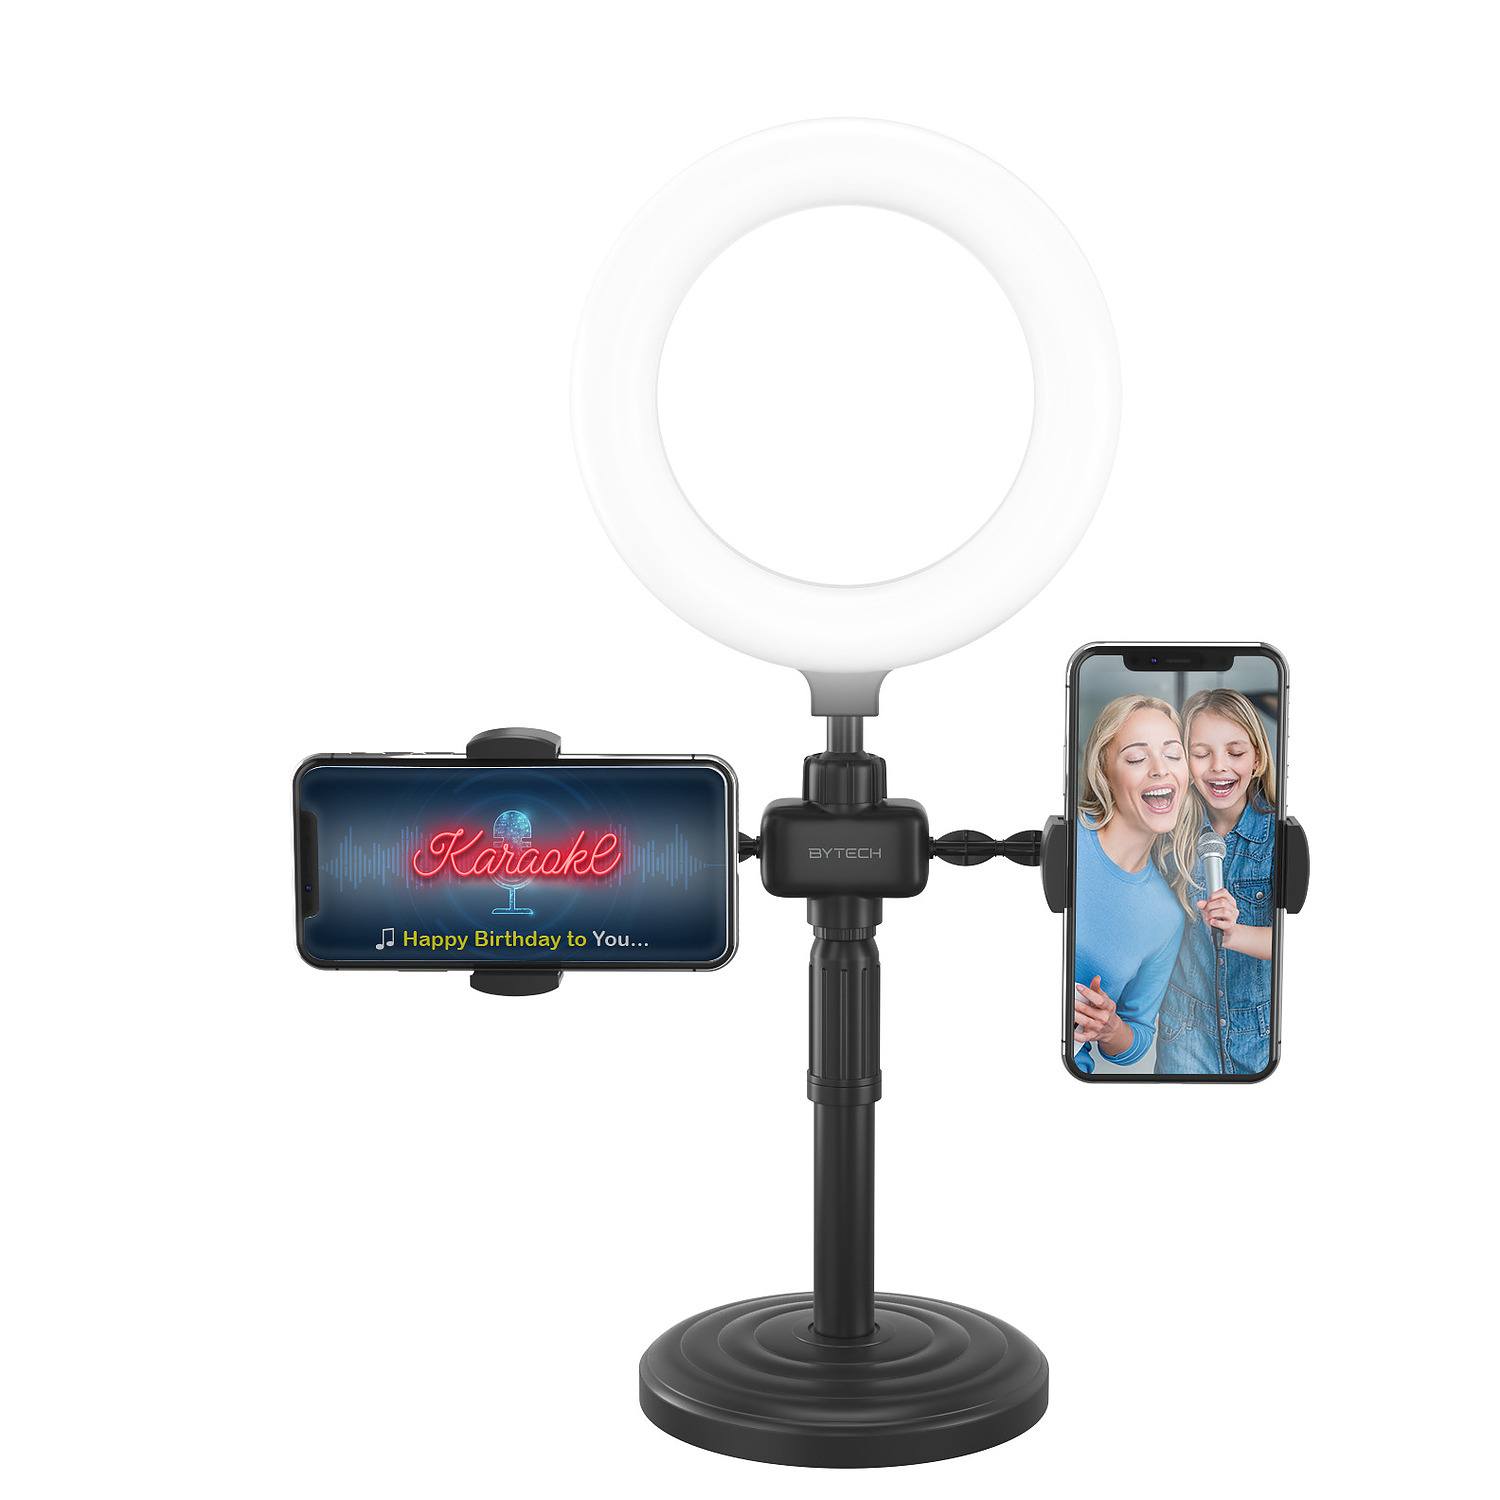 Bytech - Tech Bits - Universal vlog kit with 2 phone holders and selfie ring